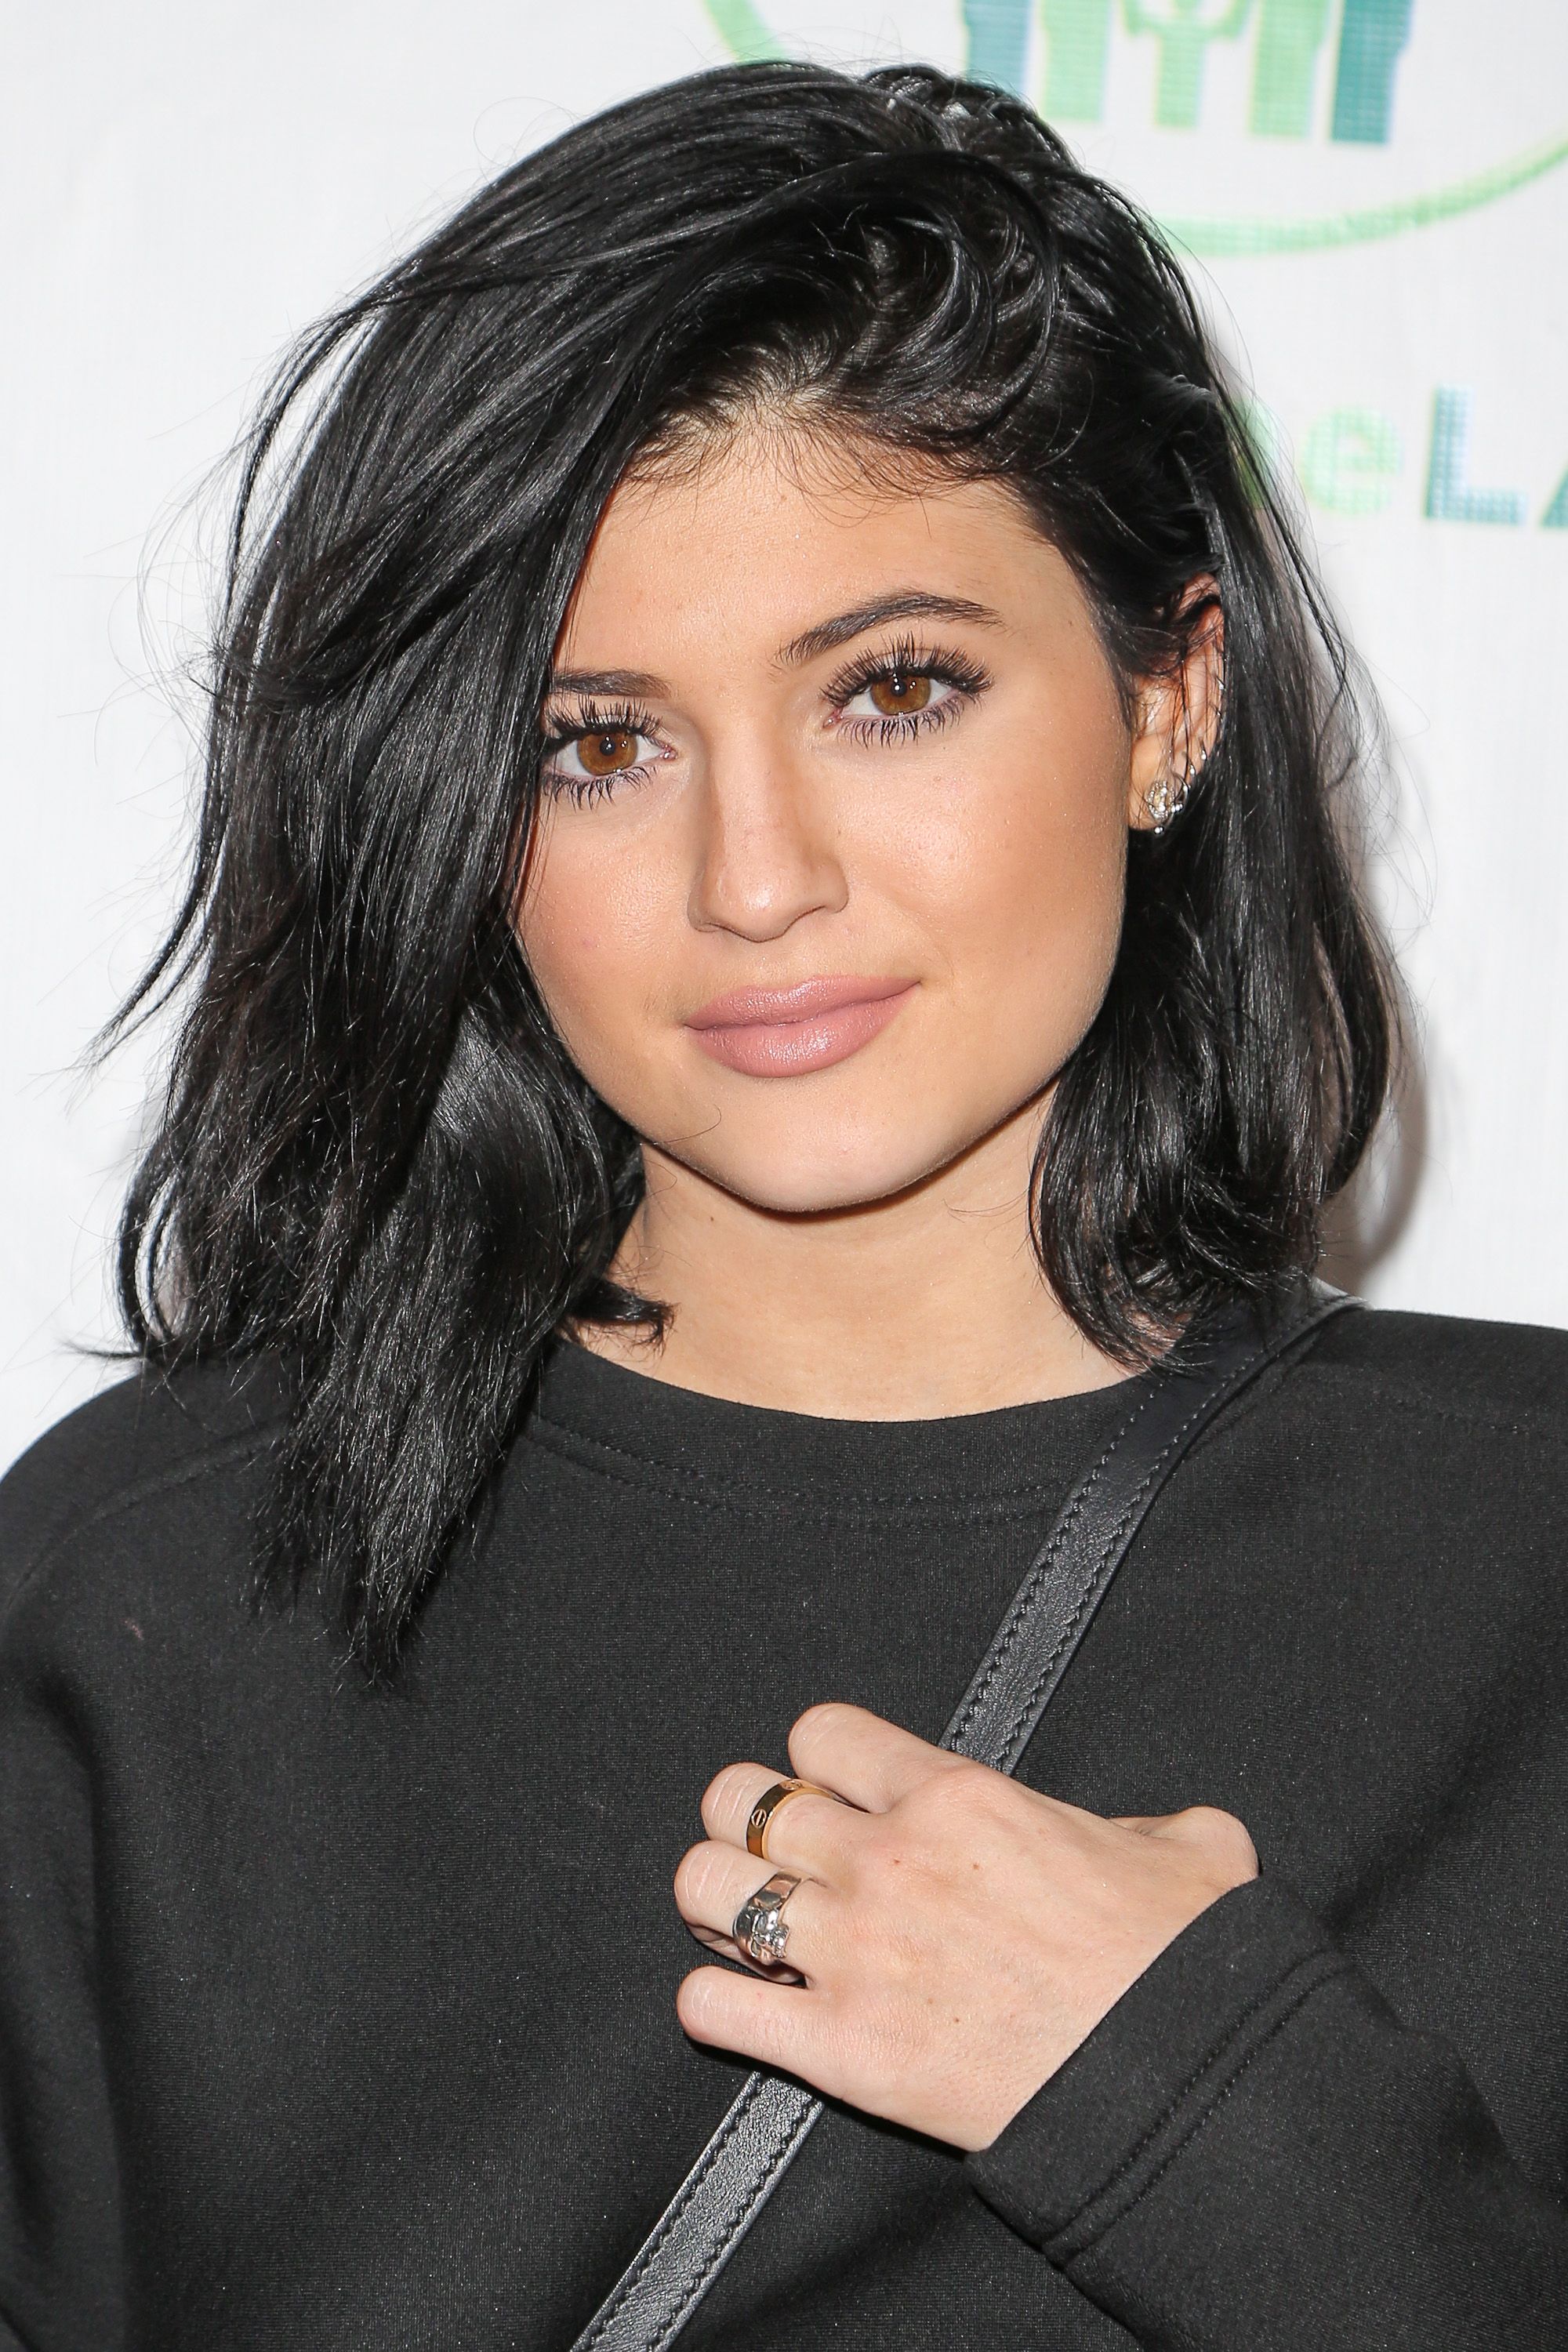 Kylie Jenner wins praise for styling daughter Stormi's hair